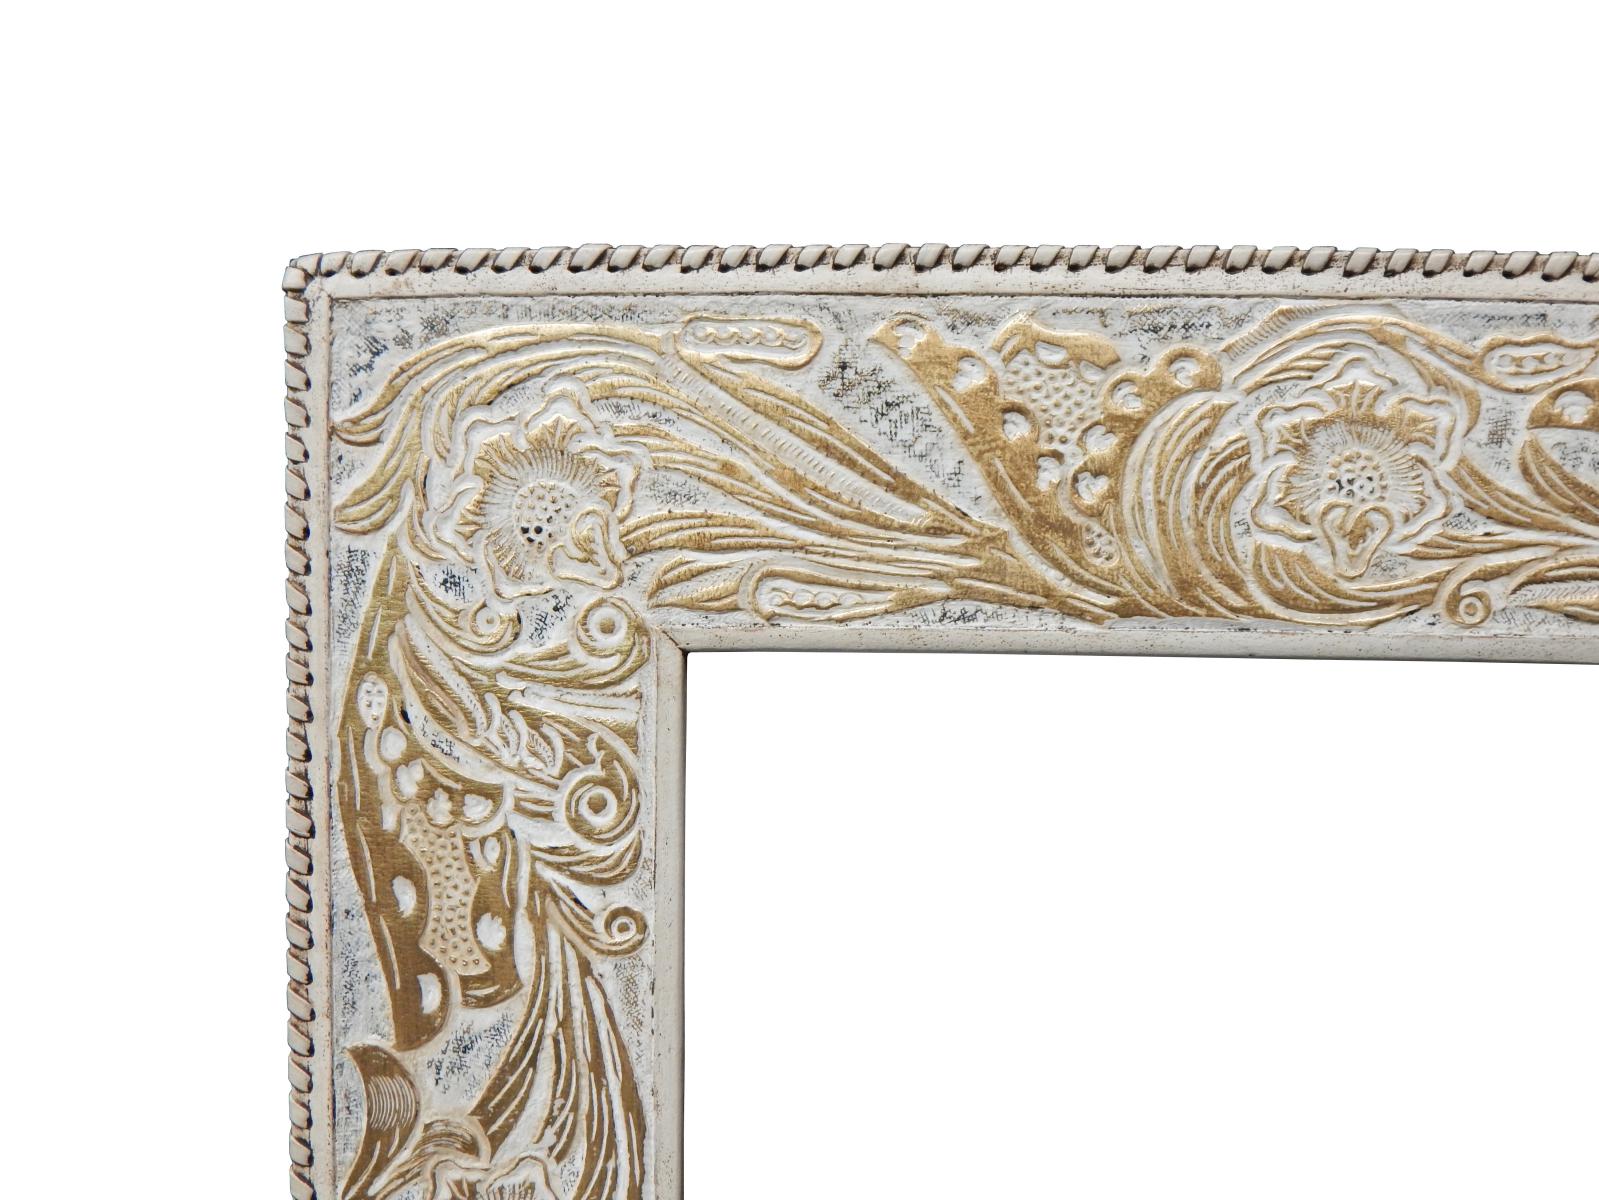 leather frame with hand tooled/tooling western floral design and hand stitch edge lacing